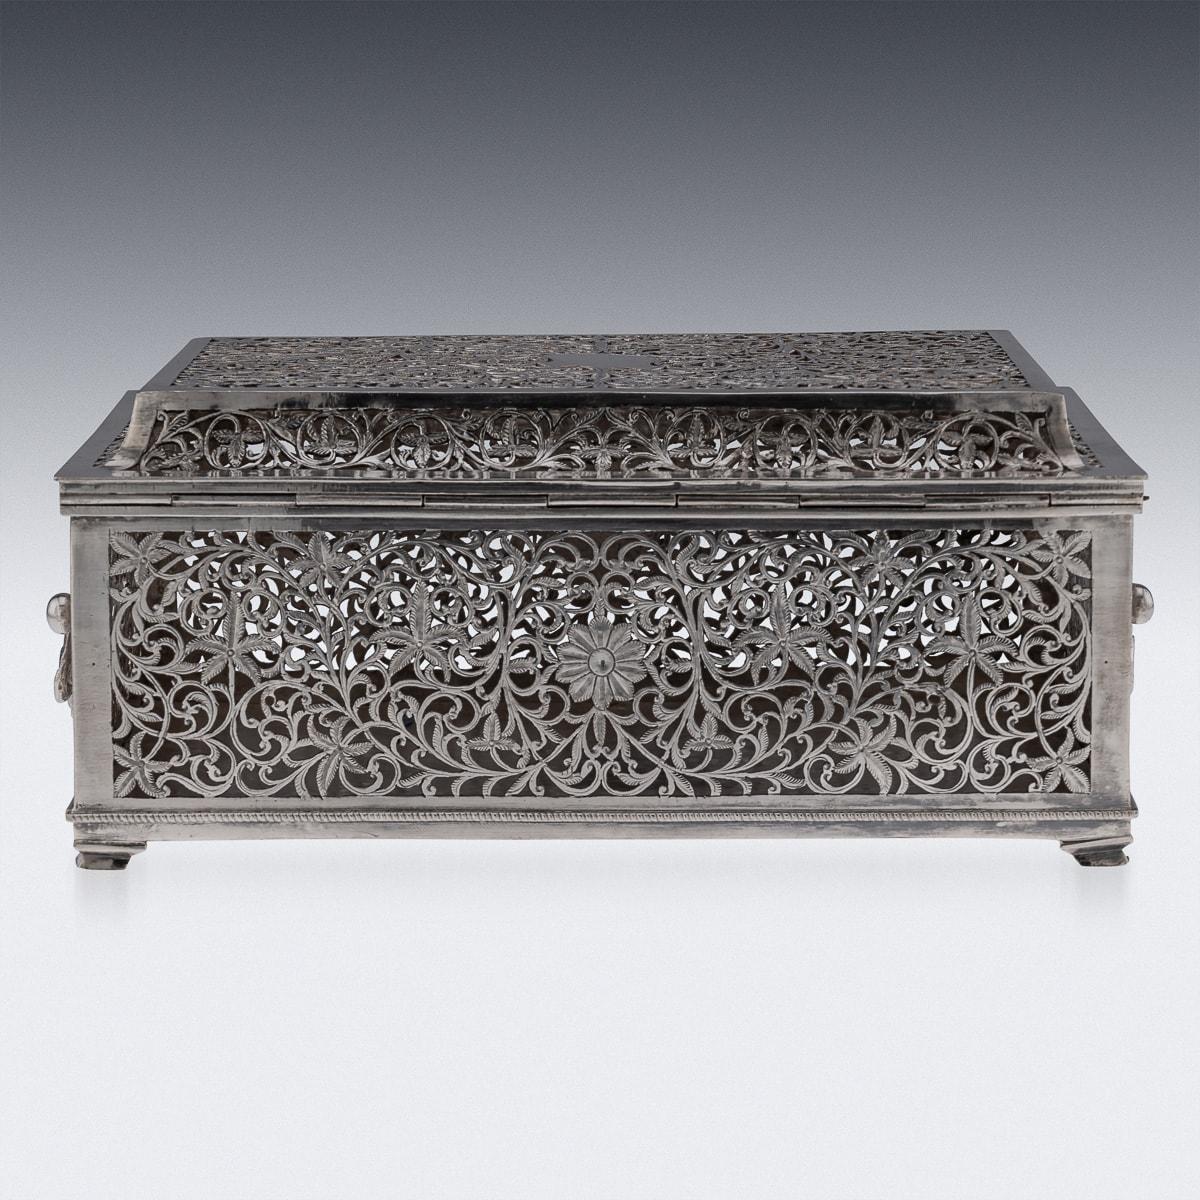 Early 20th Century Antique 20th Century Indian Kutch Solid Silver Treasure Chest / Casket c.1900